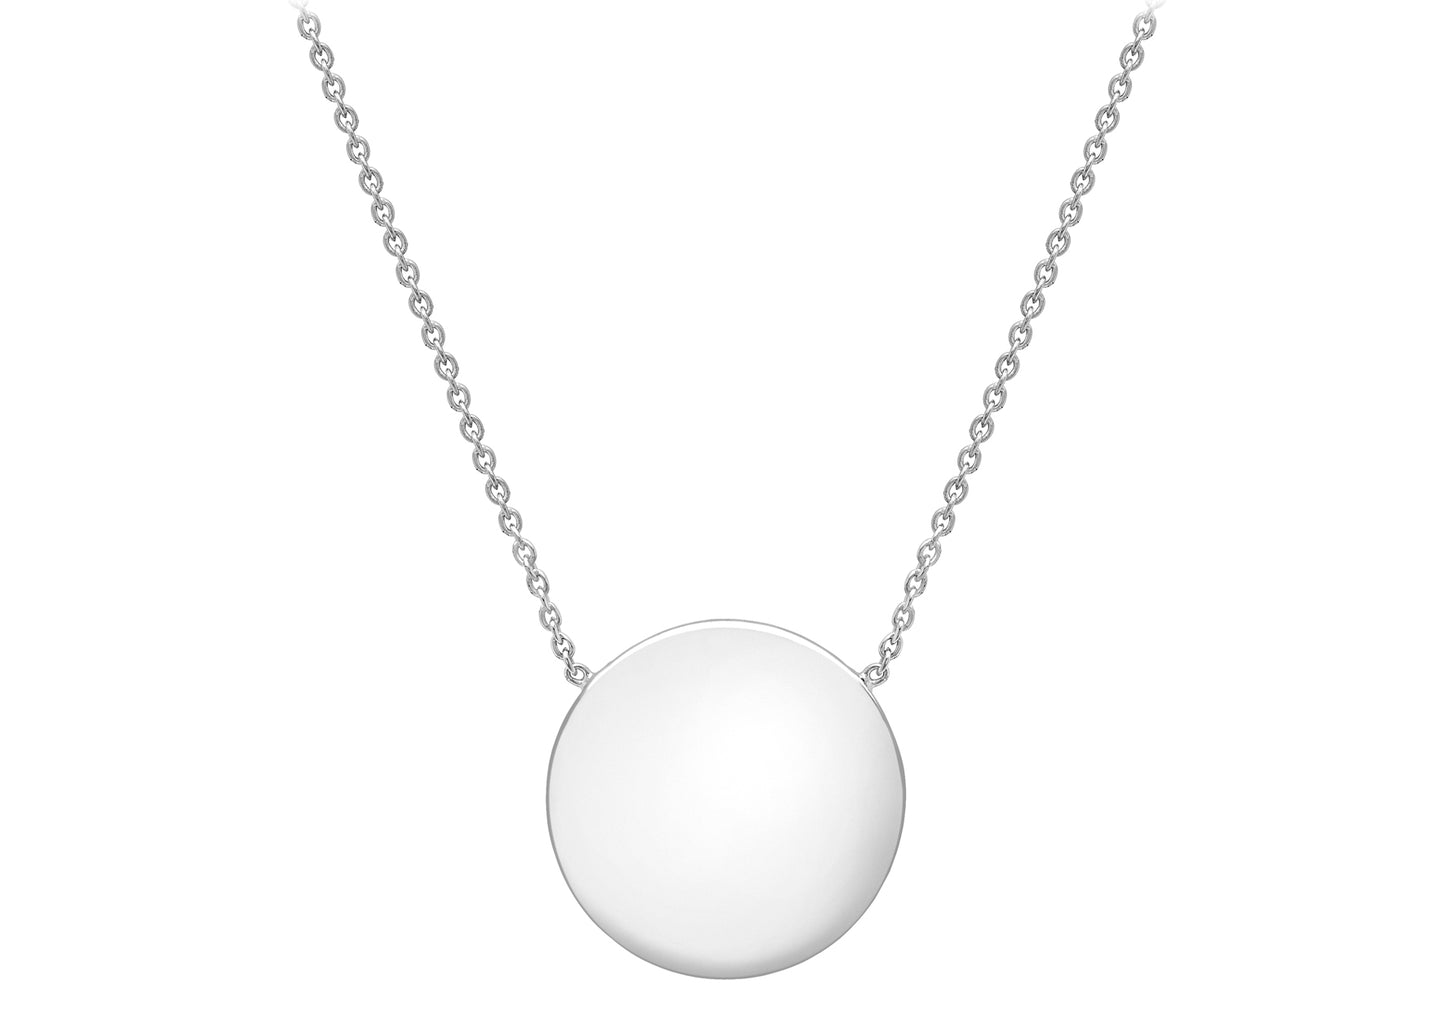 9K White Gold 15mm Disc Necklace 16" - 17"